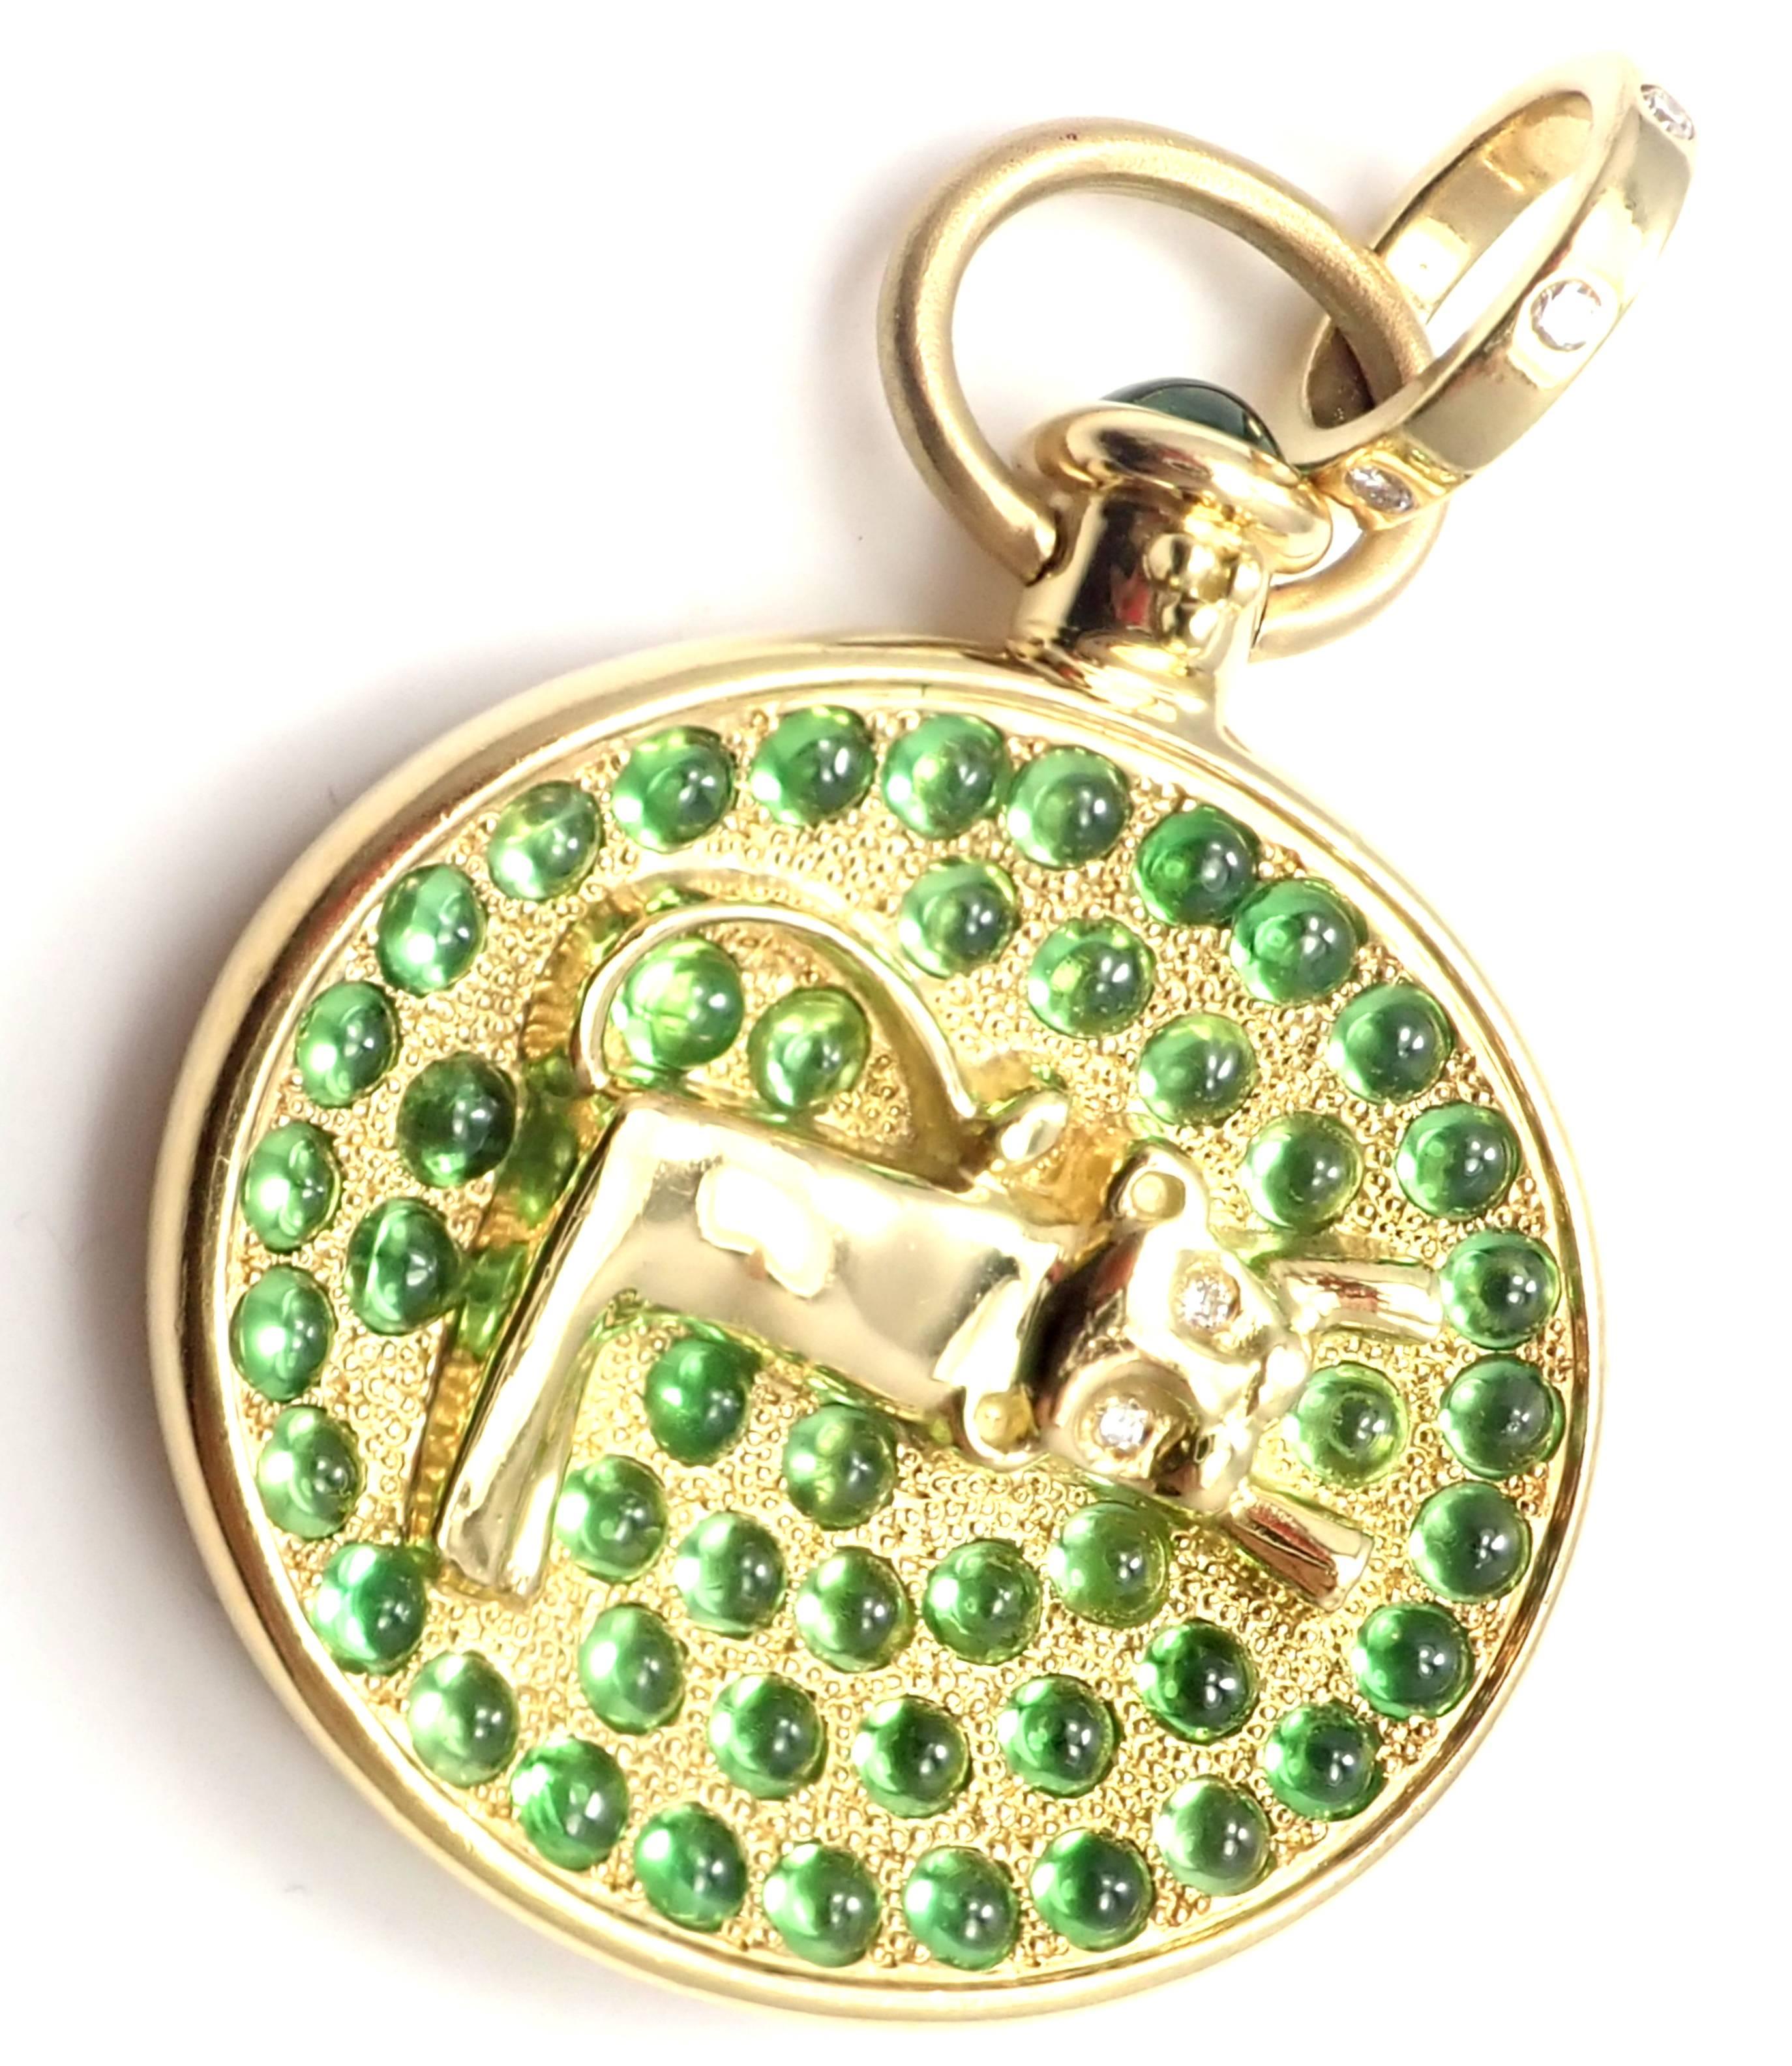 18k Yellow Gold Diamond Tsavorite Garnet Terrae Lion Pendant by Temple St Clair. 
This piece comes with a pouch. 
With Round Diamonds total weight (0.13ct) and Tsavorite: 4.3 ct
Details: 
Measurements: 31mm in diameter and 47mm in length with bail,